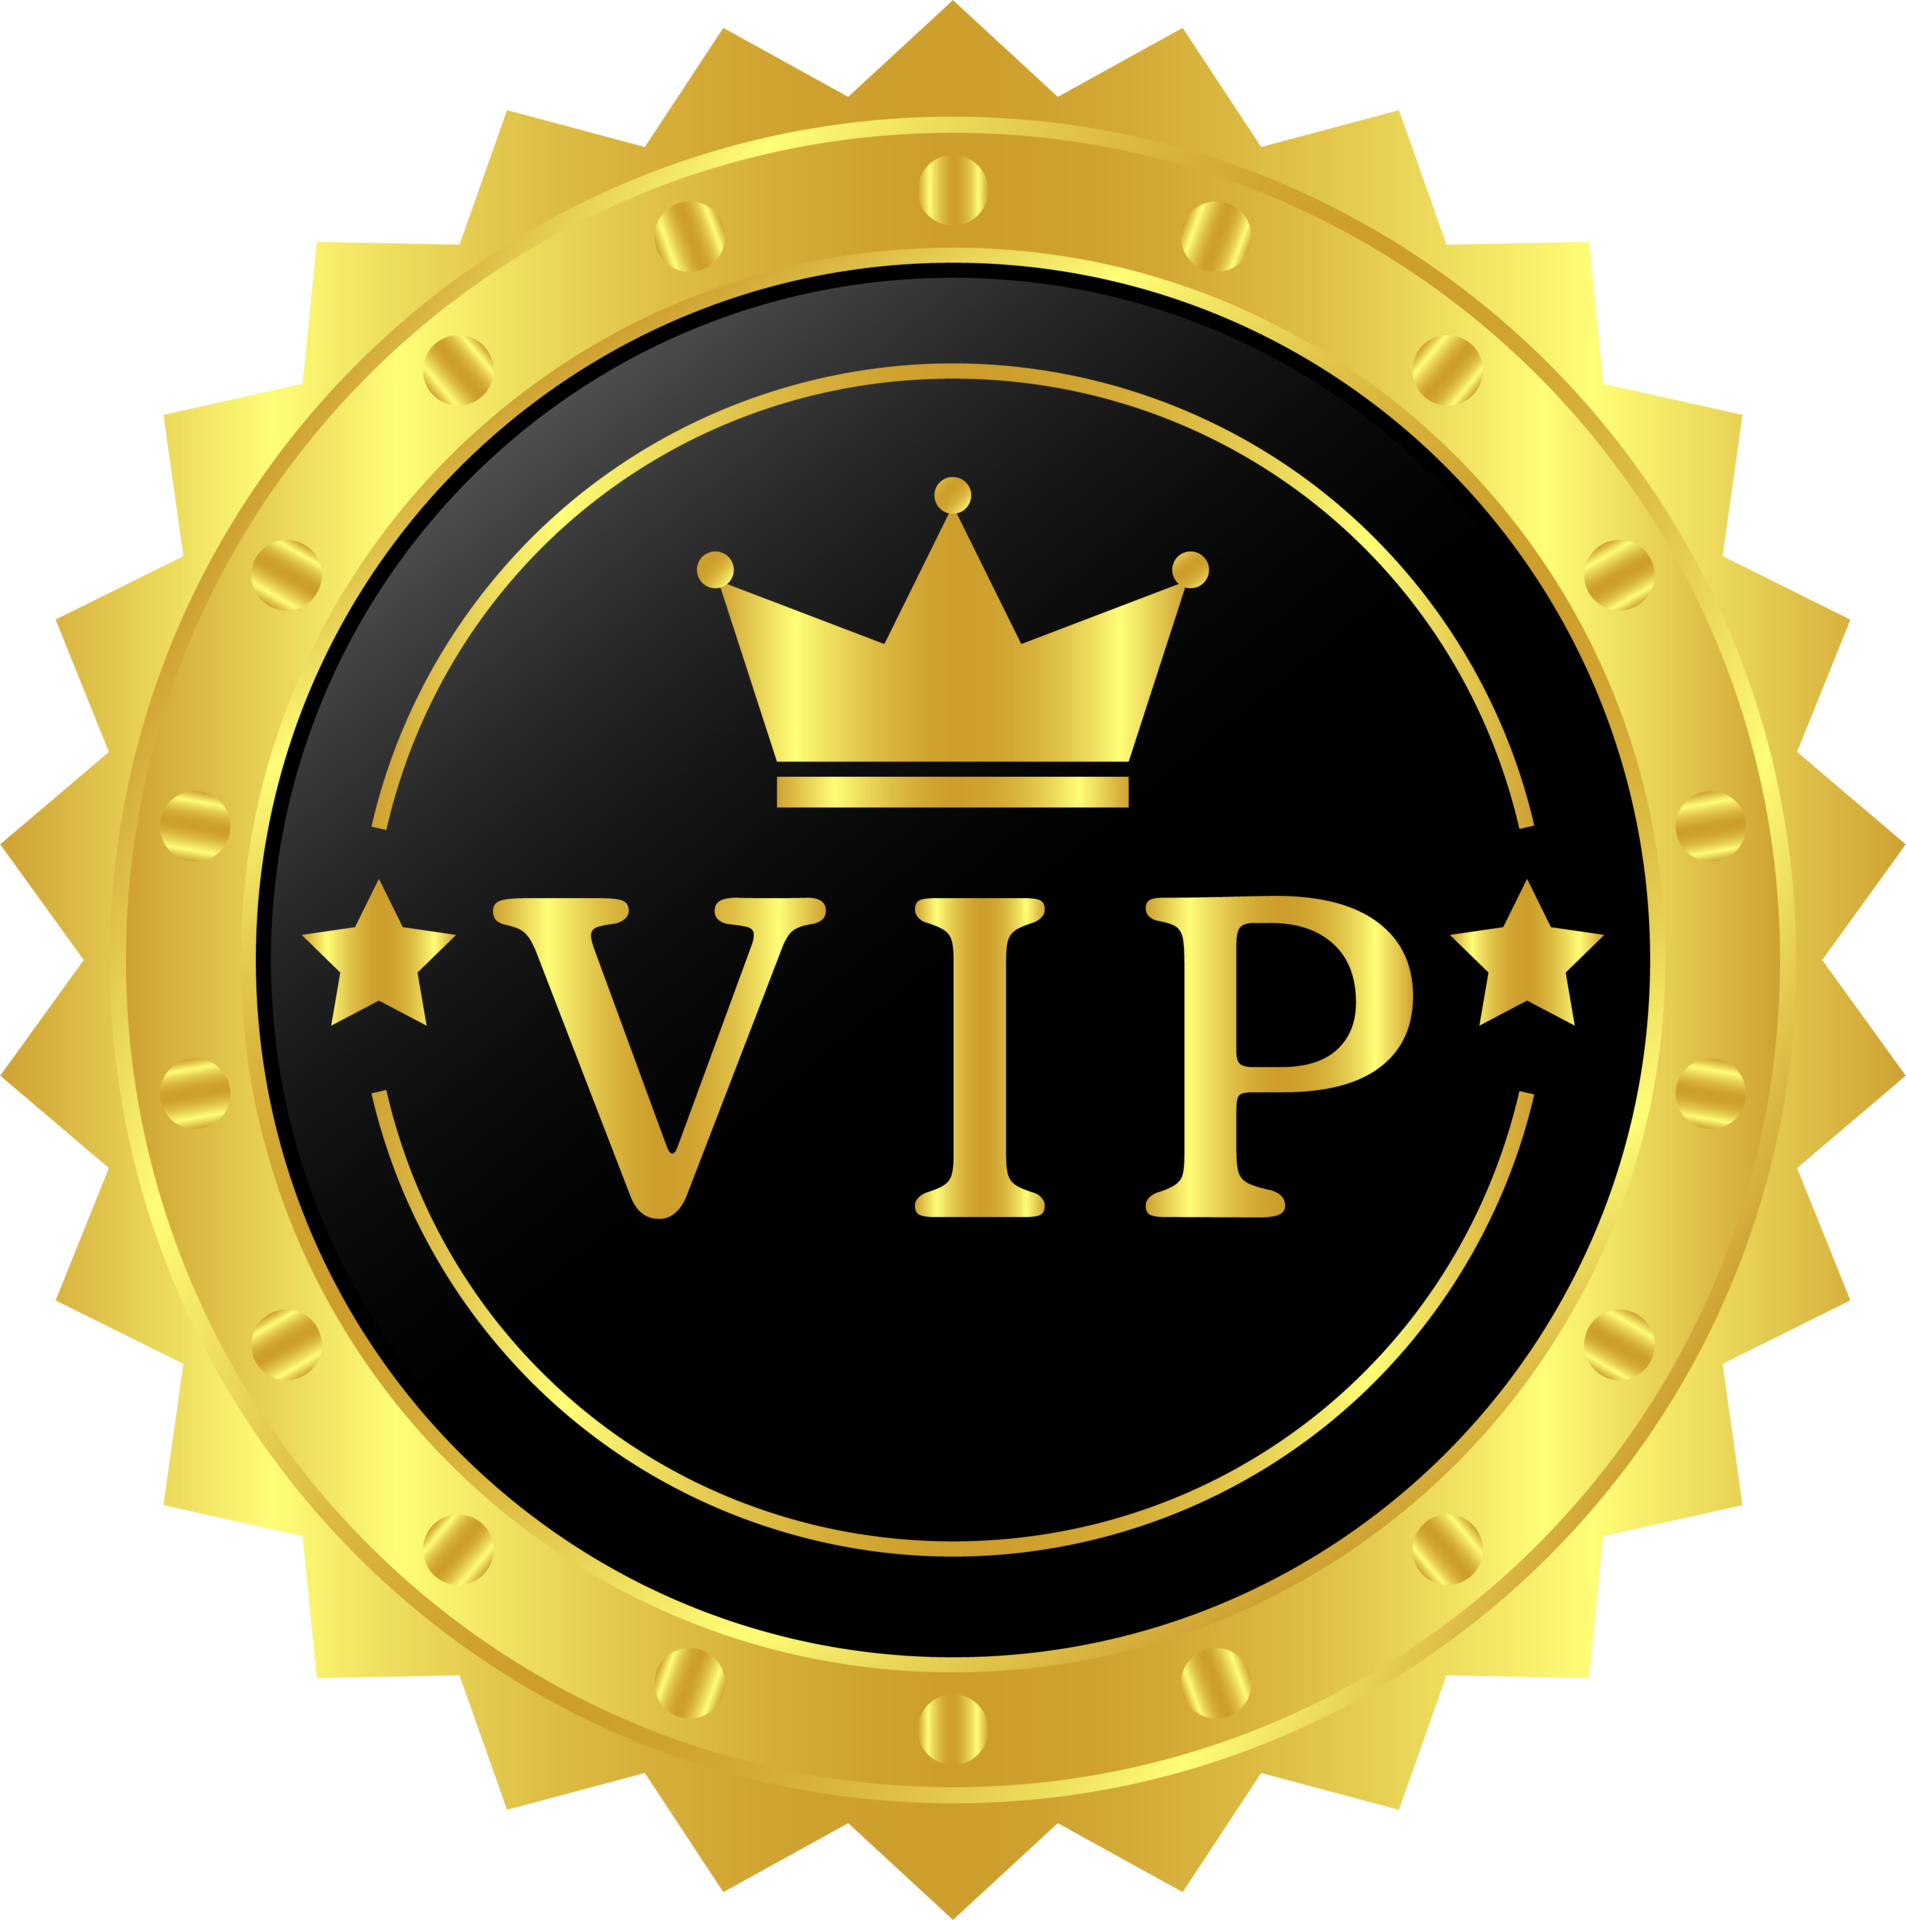 https://static.vecteezy.com/system/resources/previews/026/494/868/original/glossy-vip-black-glass-label-with-gold-crown-vip-membership-for-night-club-luxury-badge-template-exclusively-royal-membership-king-and-queen-crown-icon-vip-members-only-png.png